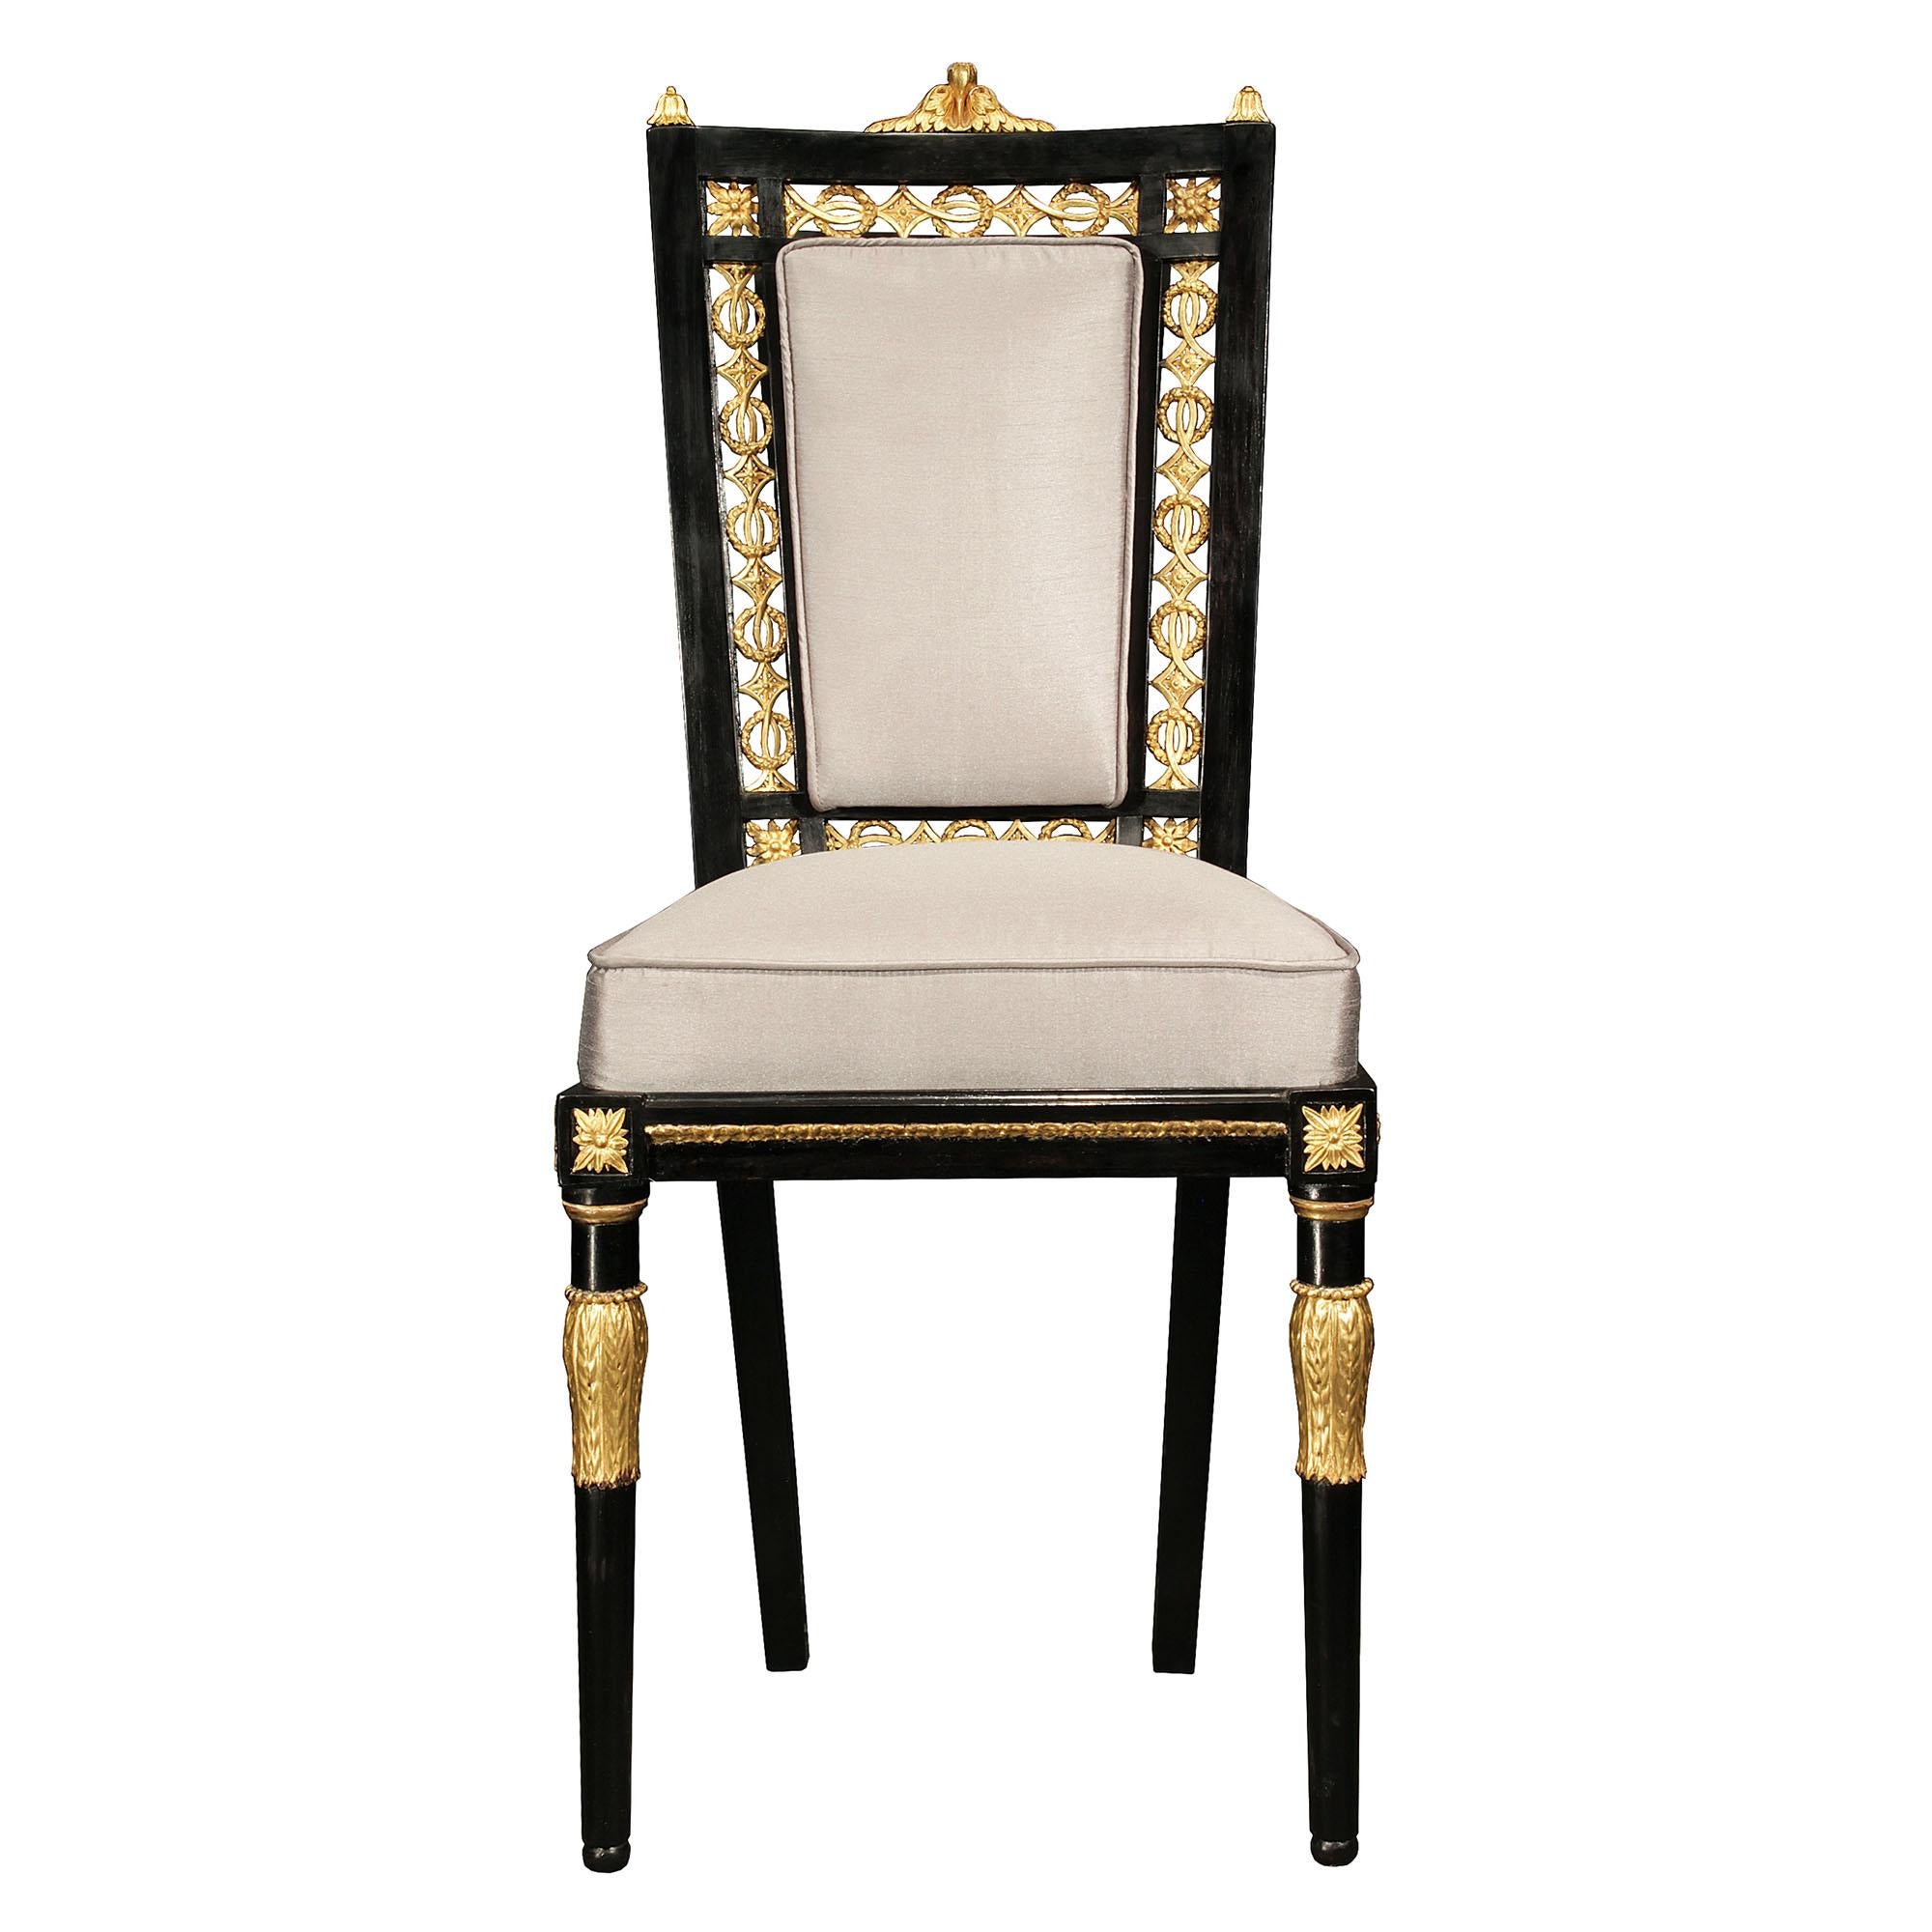 Italian 19th Century Louis XVI Style Set of Sixteen Ebony and Giltwood Chairs In Good Condition For Sale In West Palm Beach, FL